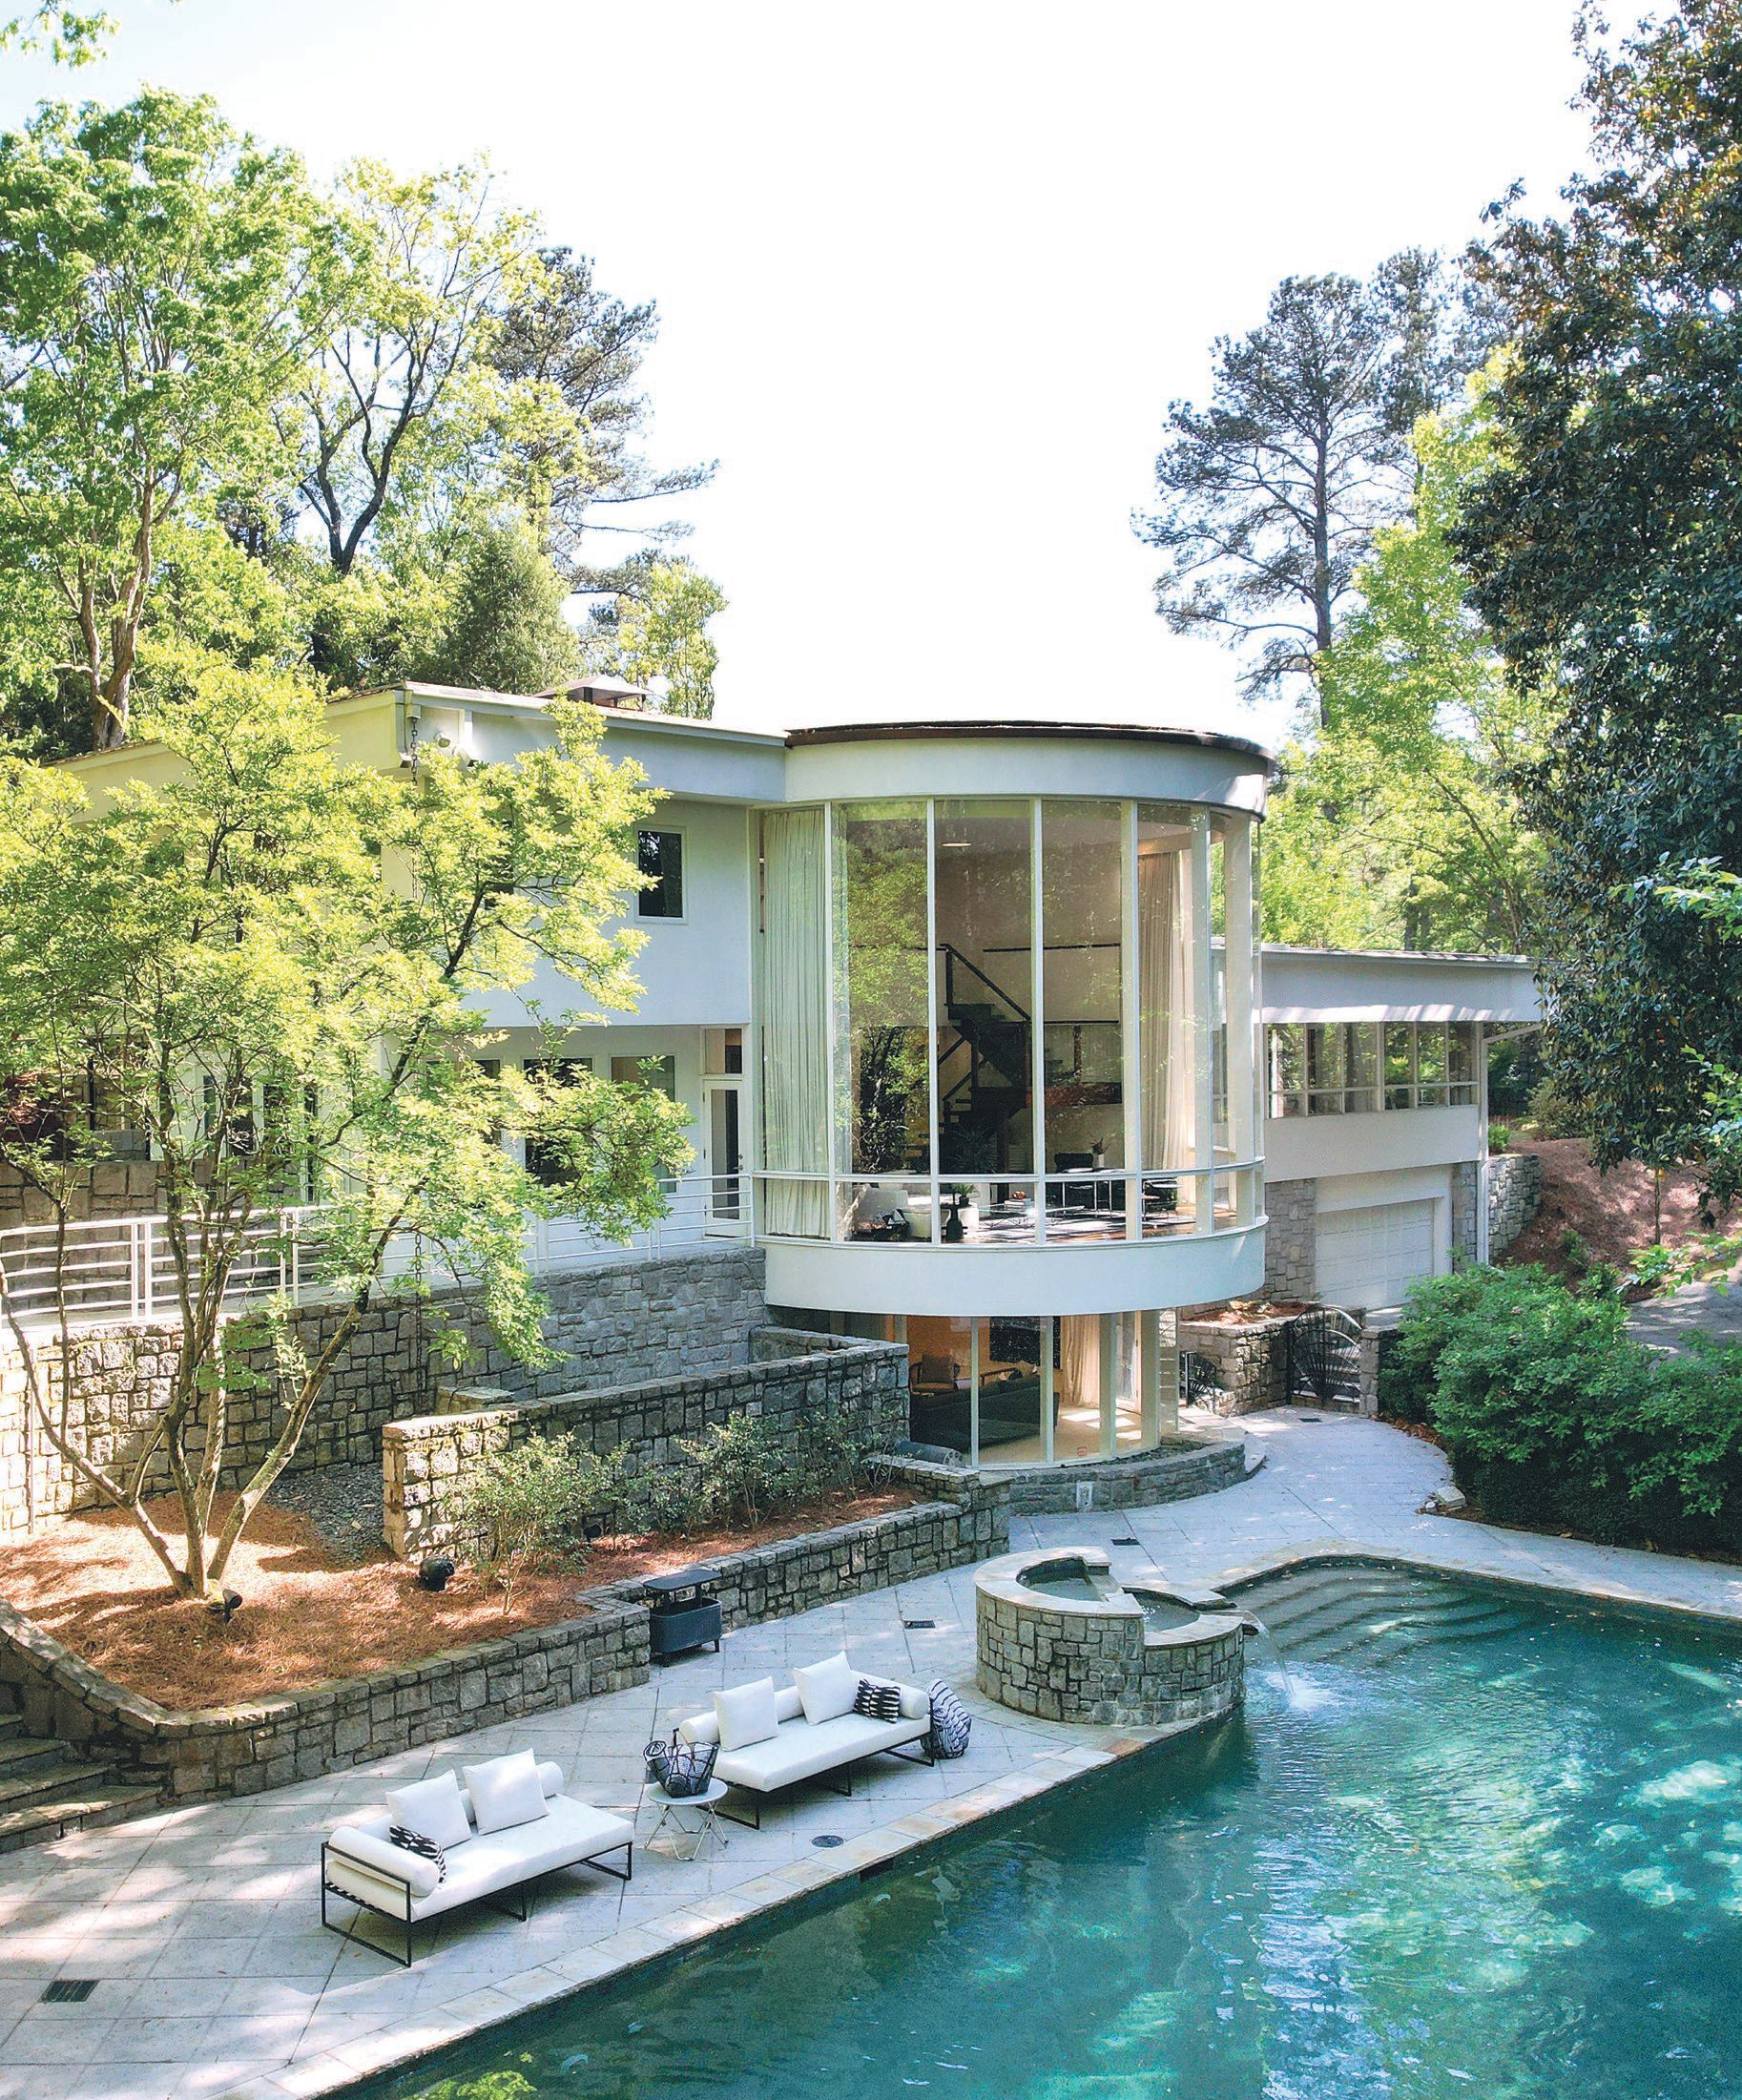 A view of the back of the house that features captivating floor-to-ceiling curved glass walls that overlook the large pebble tec pool. PHOTO COURTESY OF BERKSHIRE HATHAWAY HOMESERVICE GA PROPERTIES